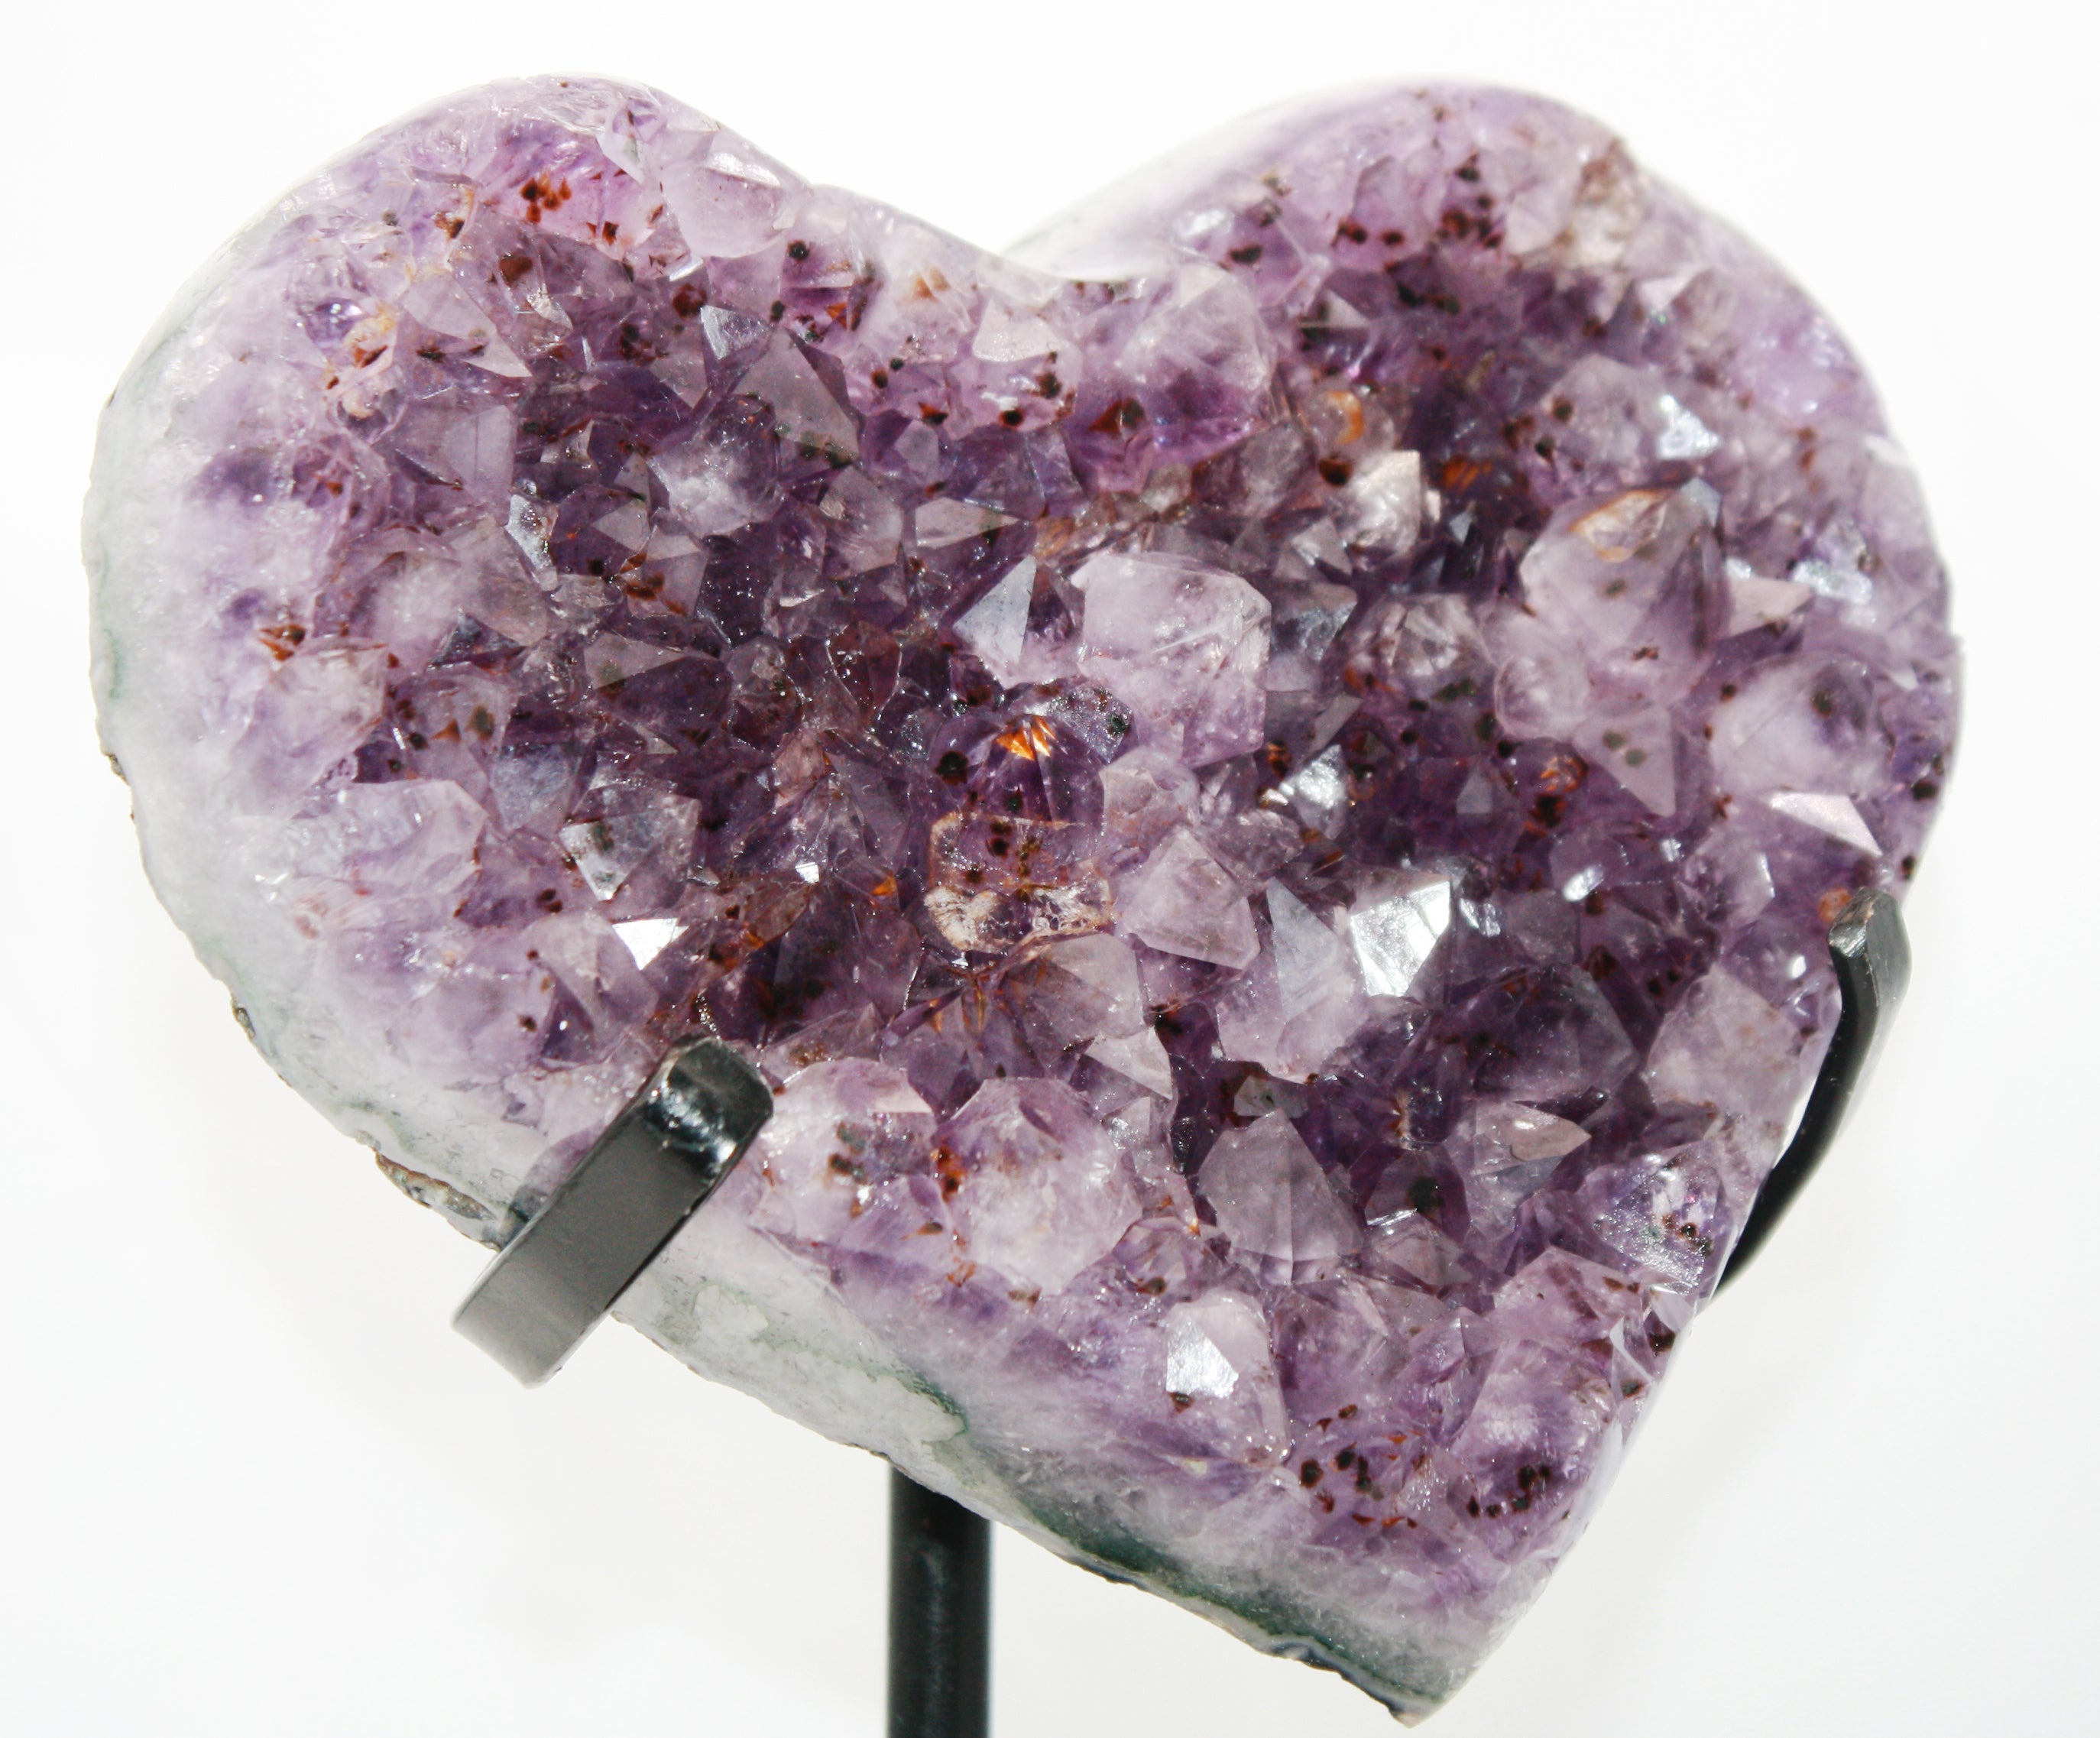 Heart shaped purple crystal with rigid sparkly crystals